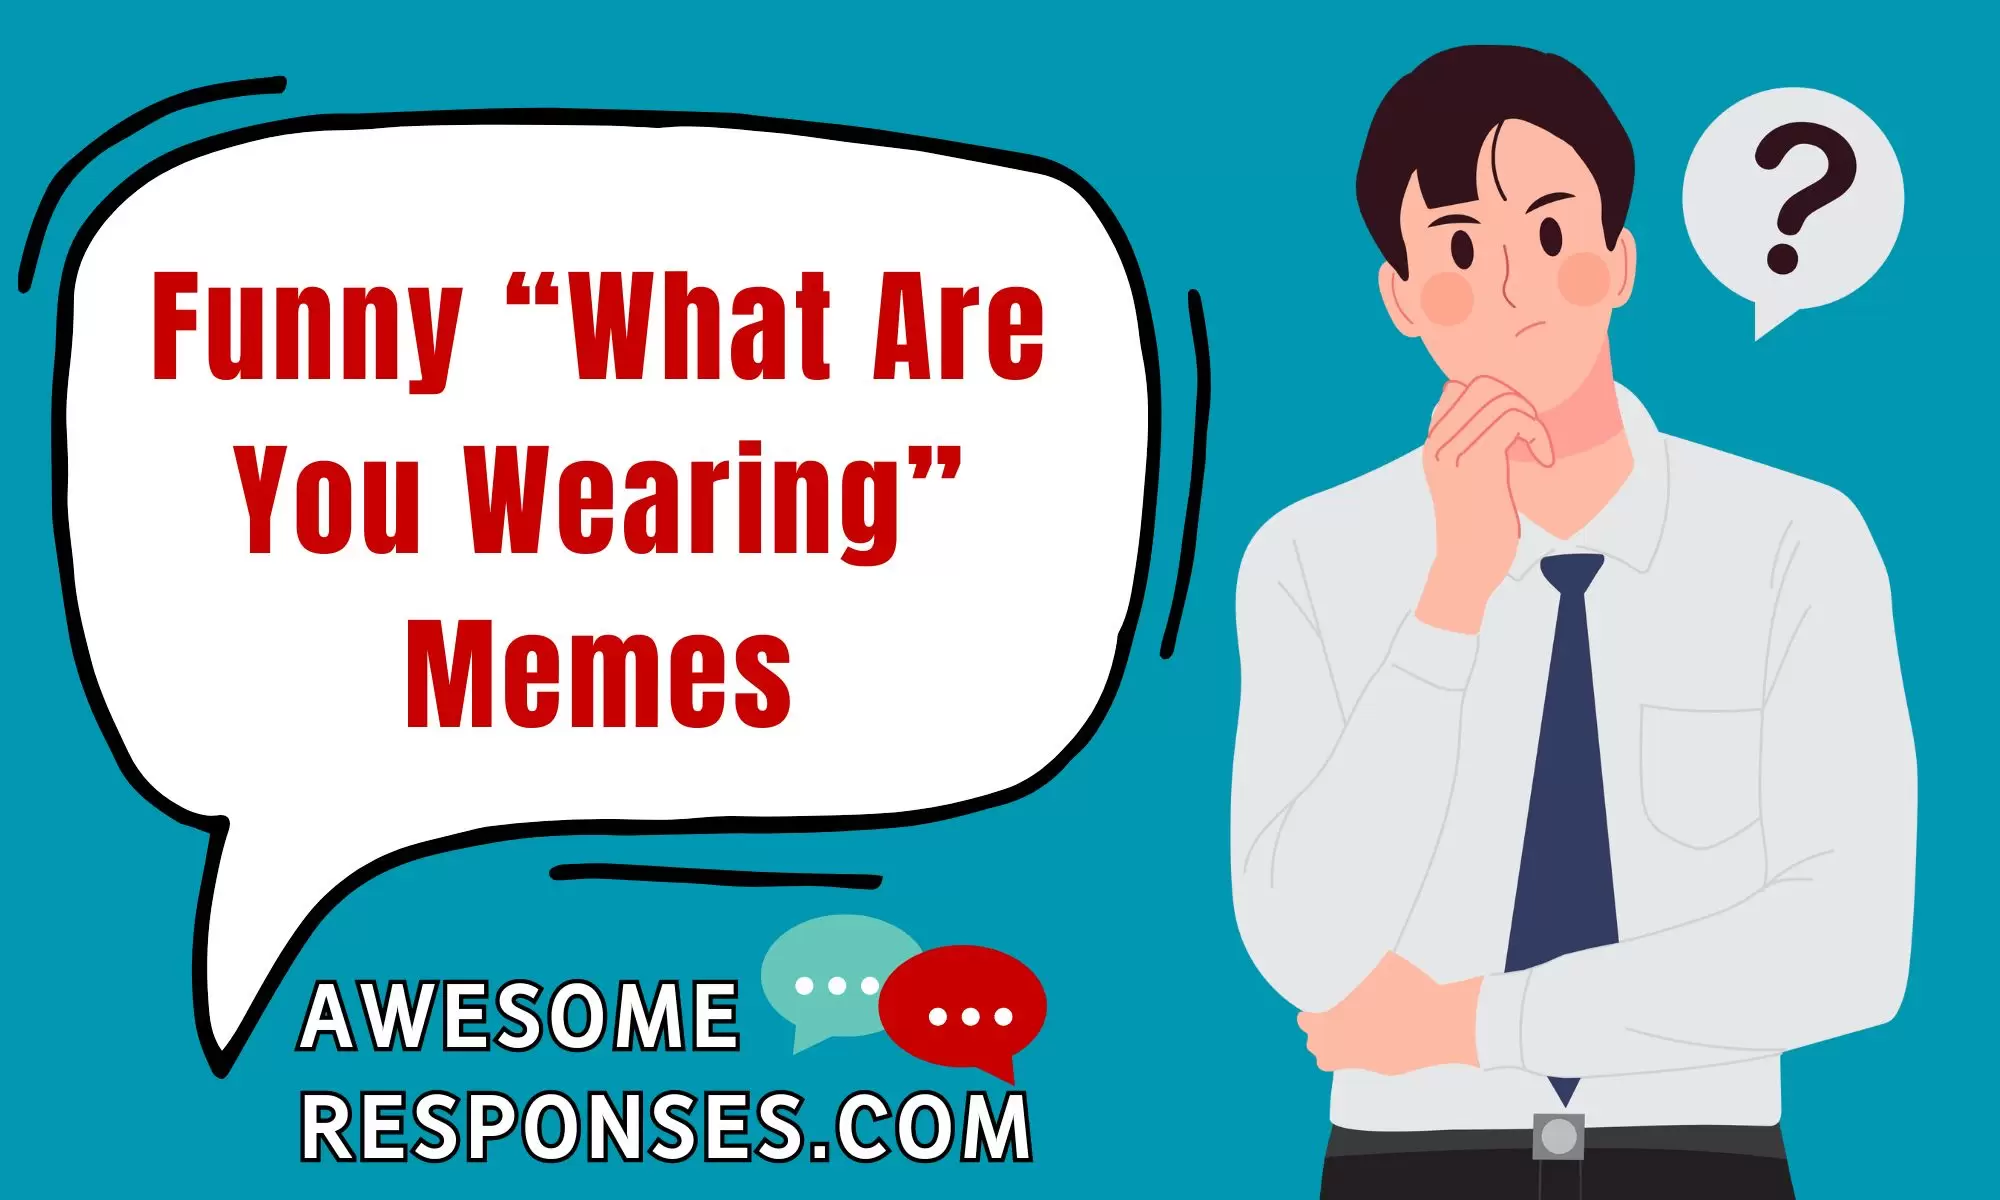 Funny “What Are You Wearing” Memes